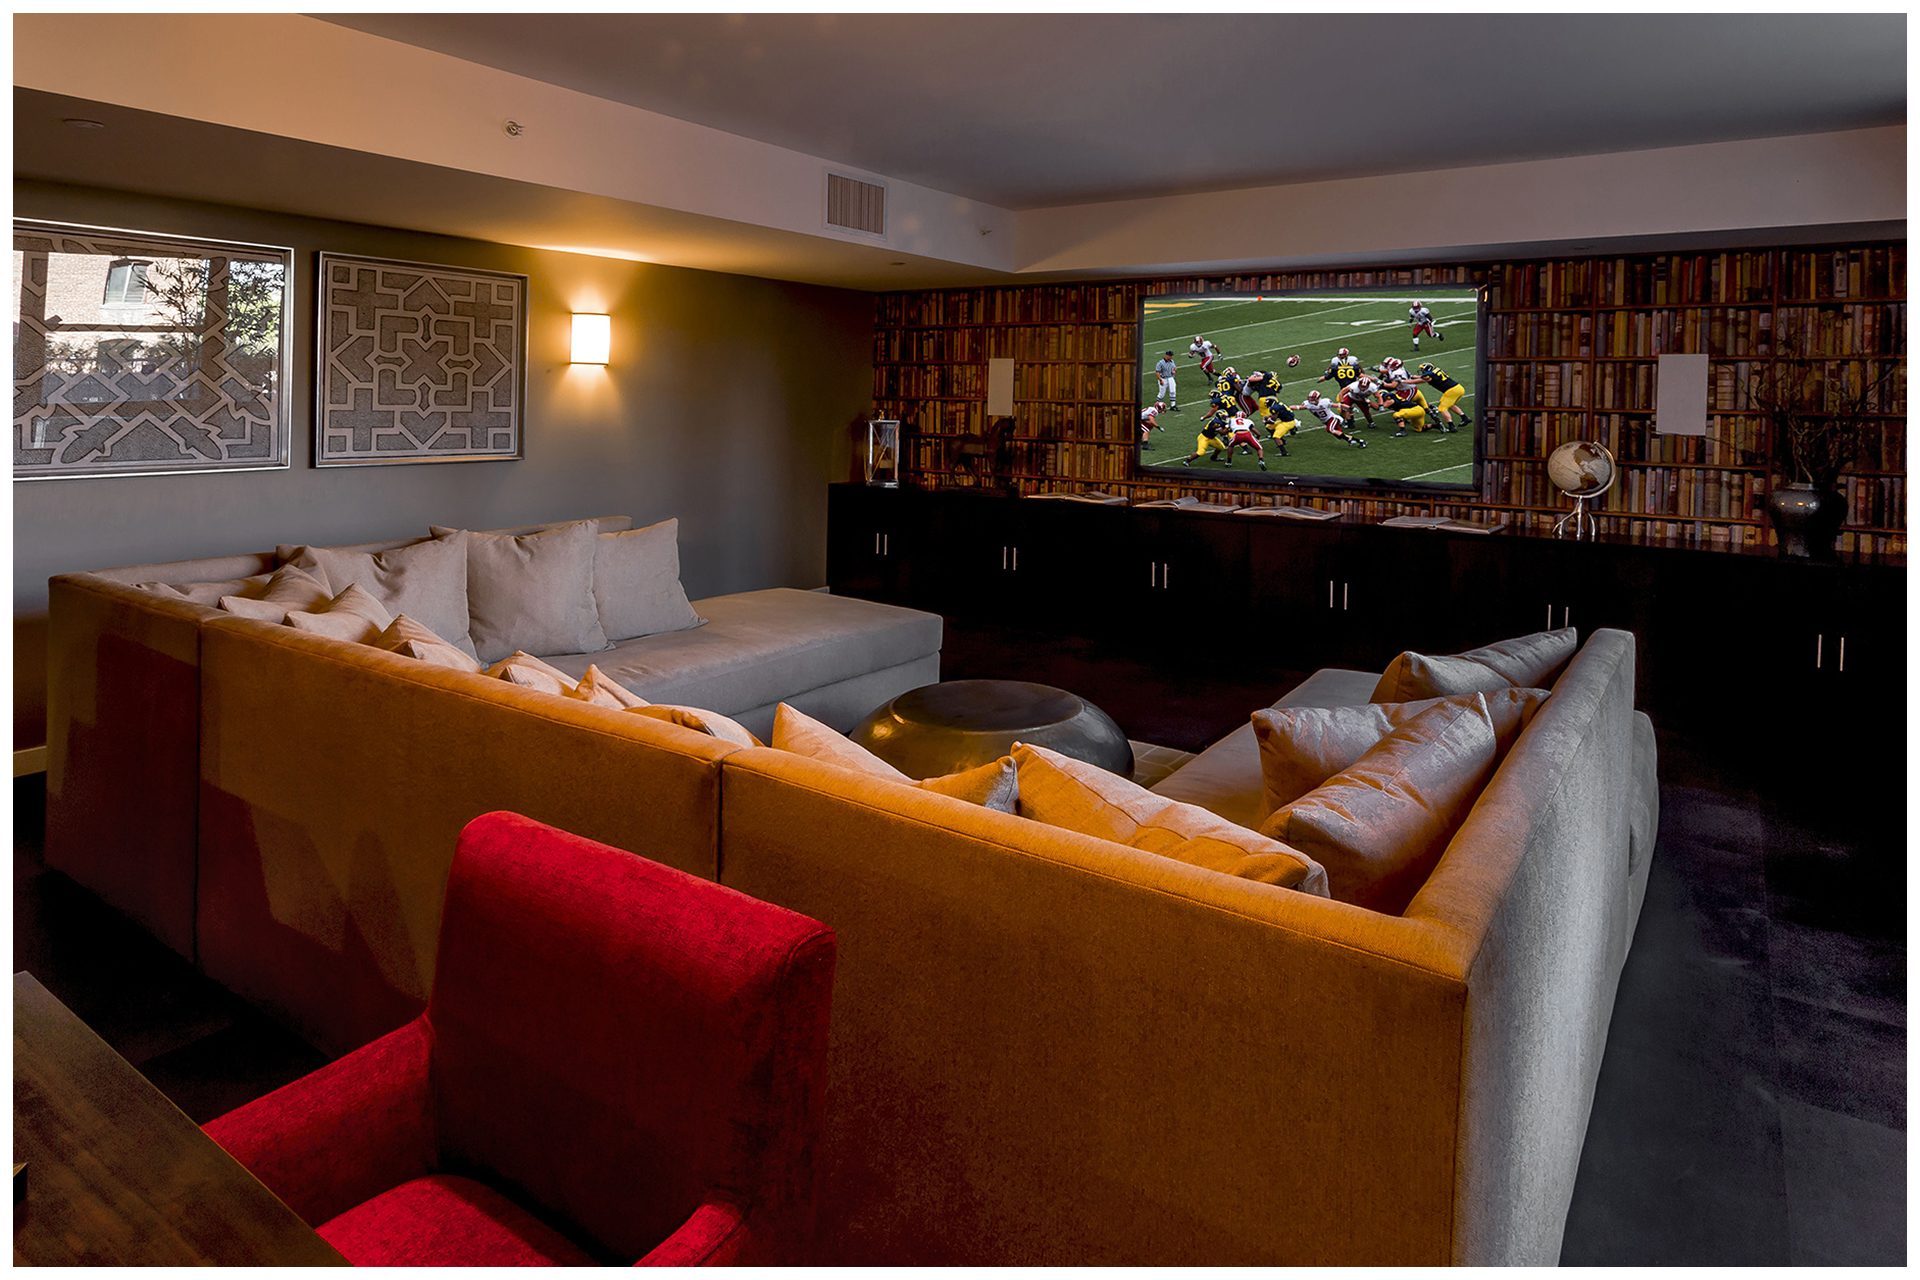 LOUNGE PROVISIONSBusiness Lounge or Game Lounge Audio Video Provisions & WiFi. Audio Video provisions are controlled via an in-room wall-mounted iPad and remotely from leasing office iPad. In-room iPad allows a limited range of volume change for music.